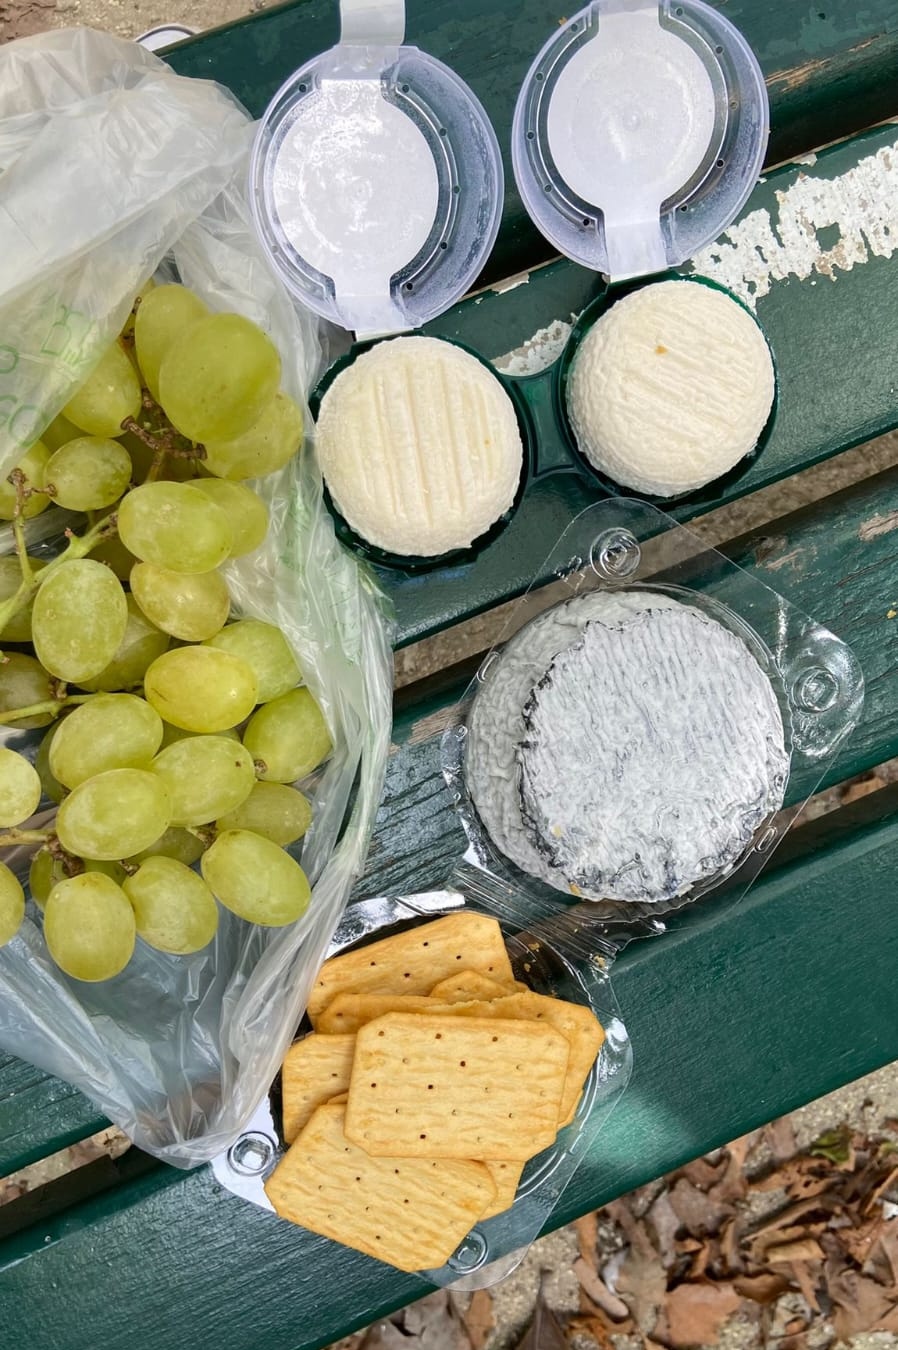 cheeses in plastic boxes and some crackers sitting on a bench